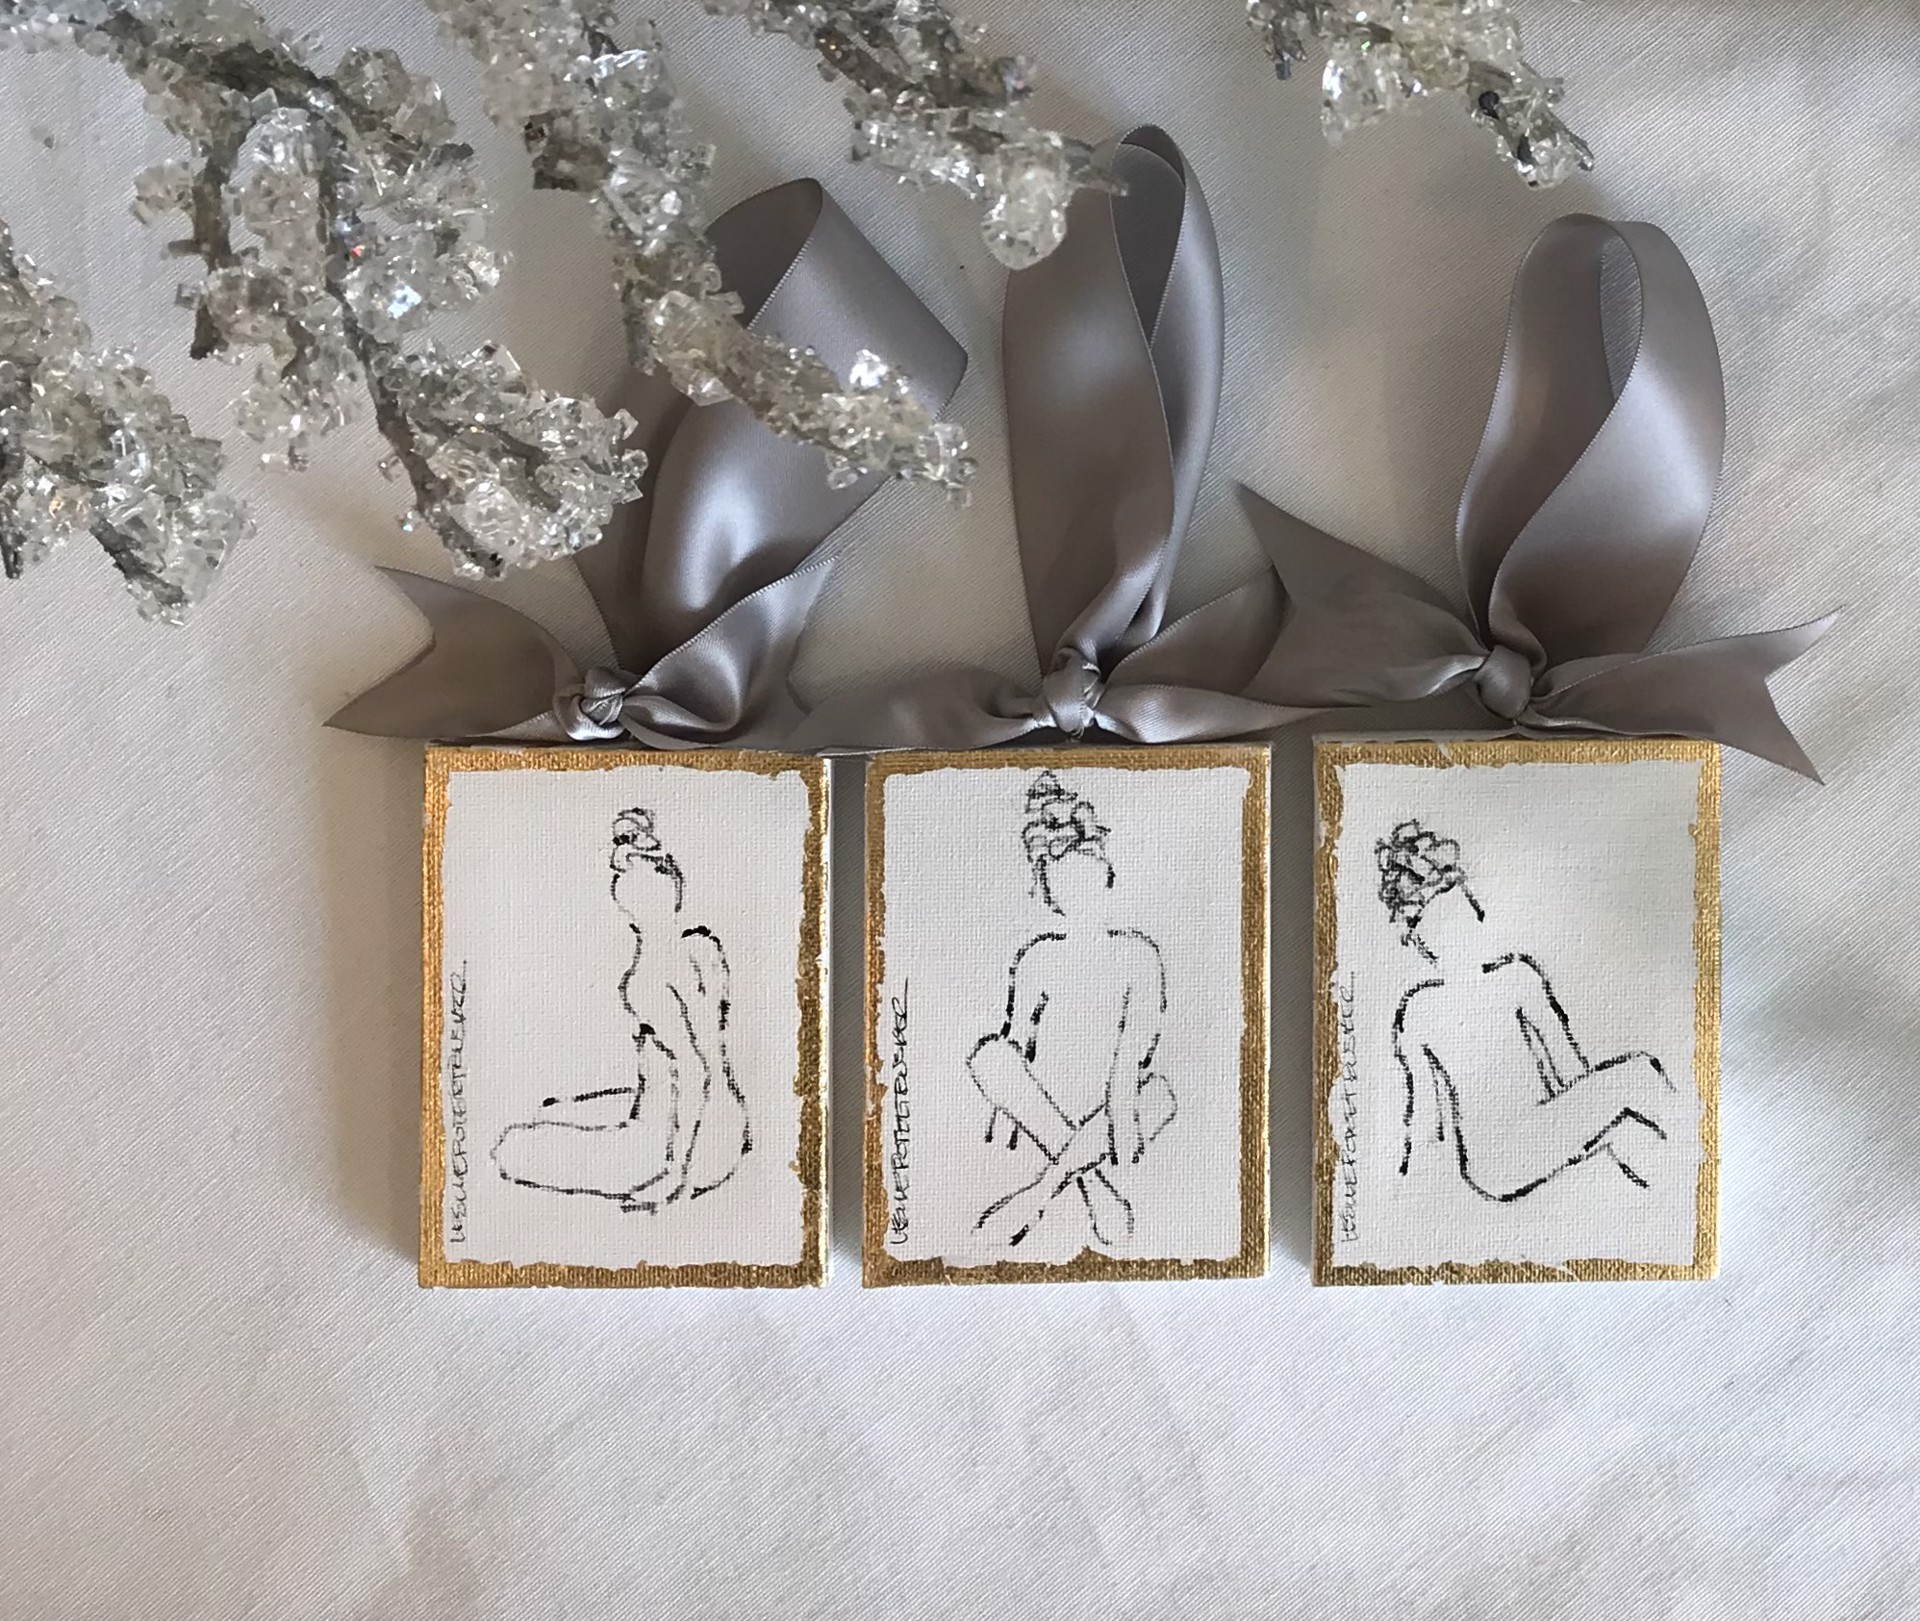 2021 Holiday Figure Ornaments, Set of Three, Group 4 by Leslie Poteet Busker